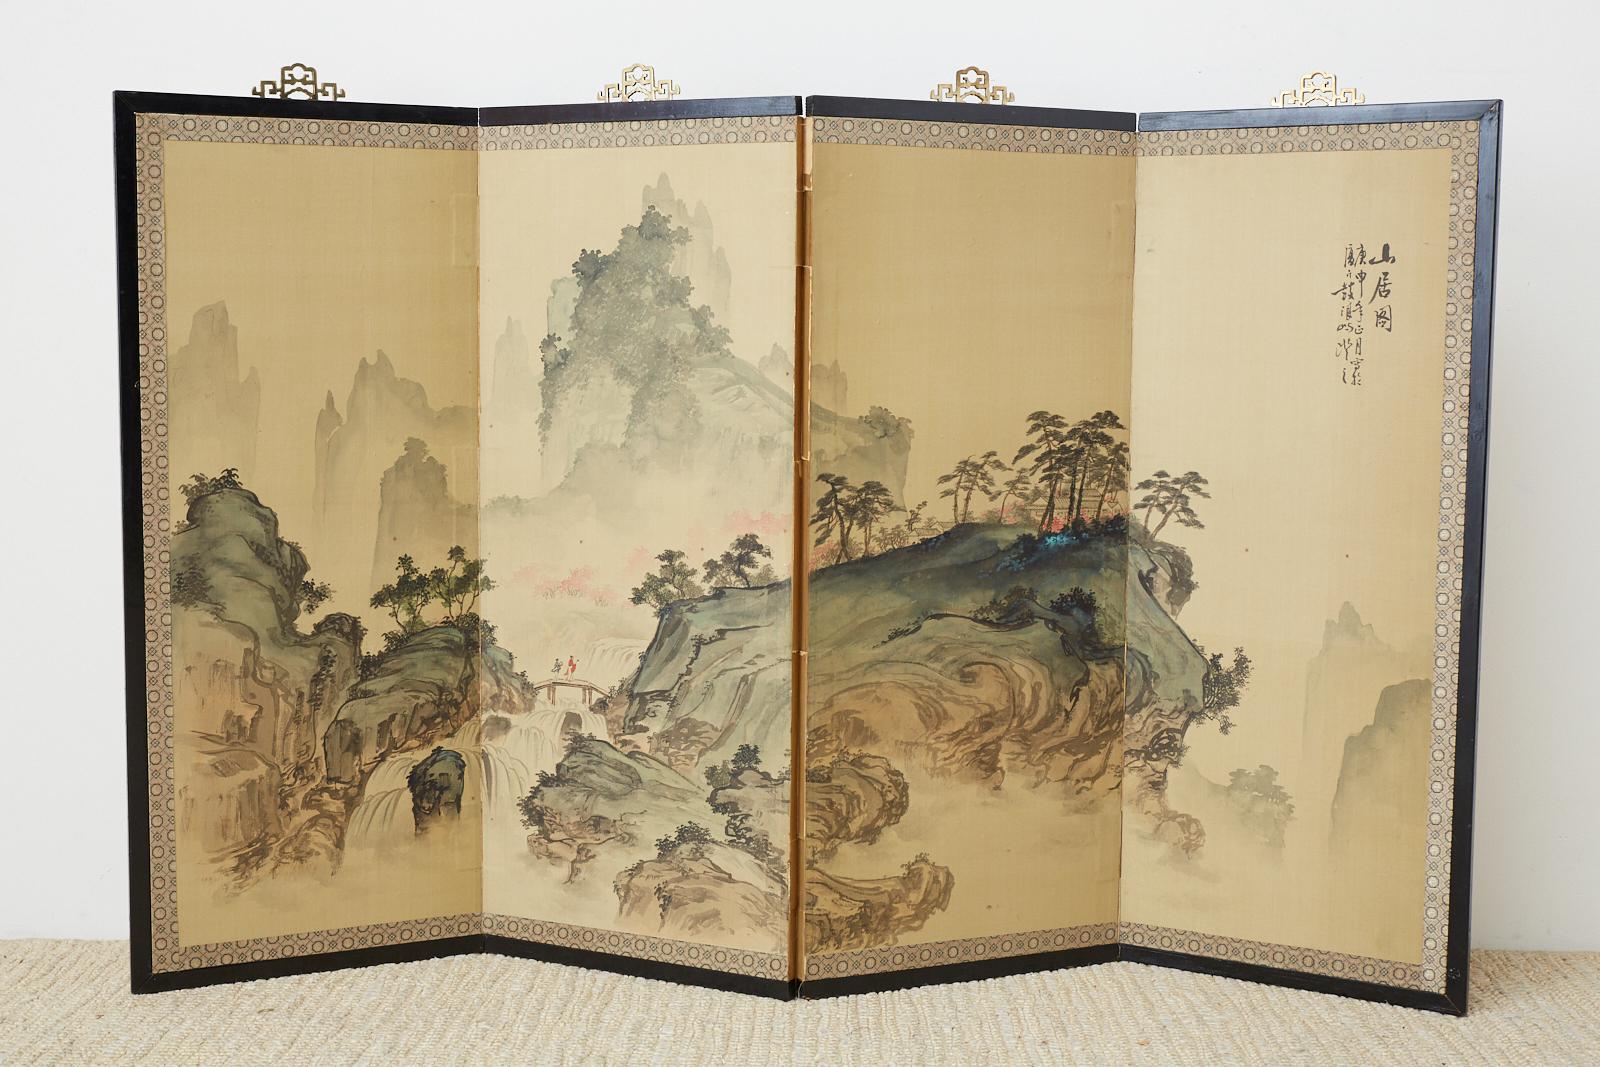 Dramatic Japanese late Meiji early Showa period landscape screen titled Mountain Residence. Ink and color pigments on paper made in the Nihonga school style. Signed Sankyo and dated with cyclical date April 1920. Set in a black lacquered frame that